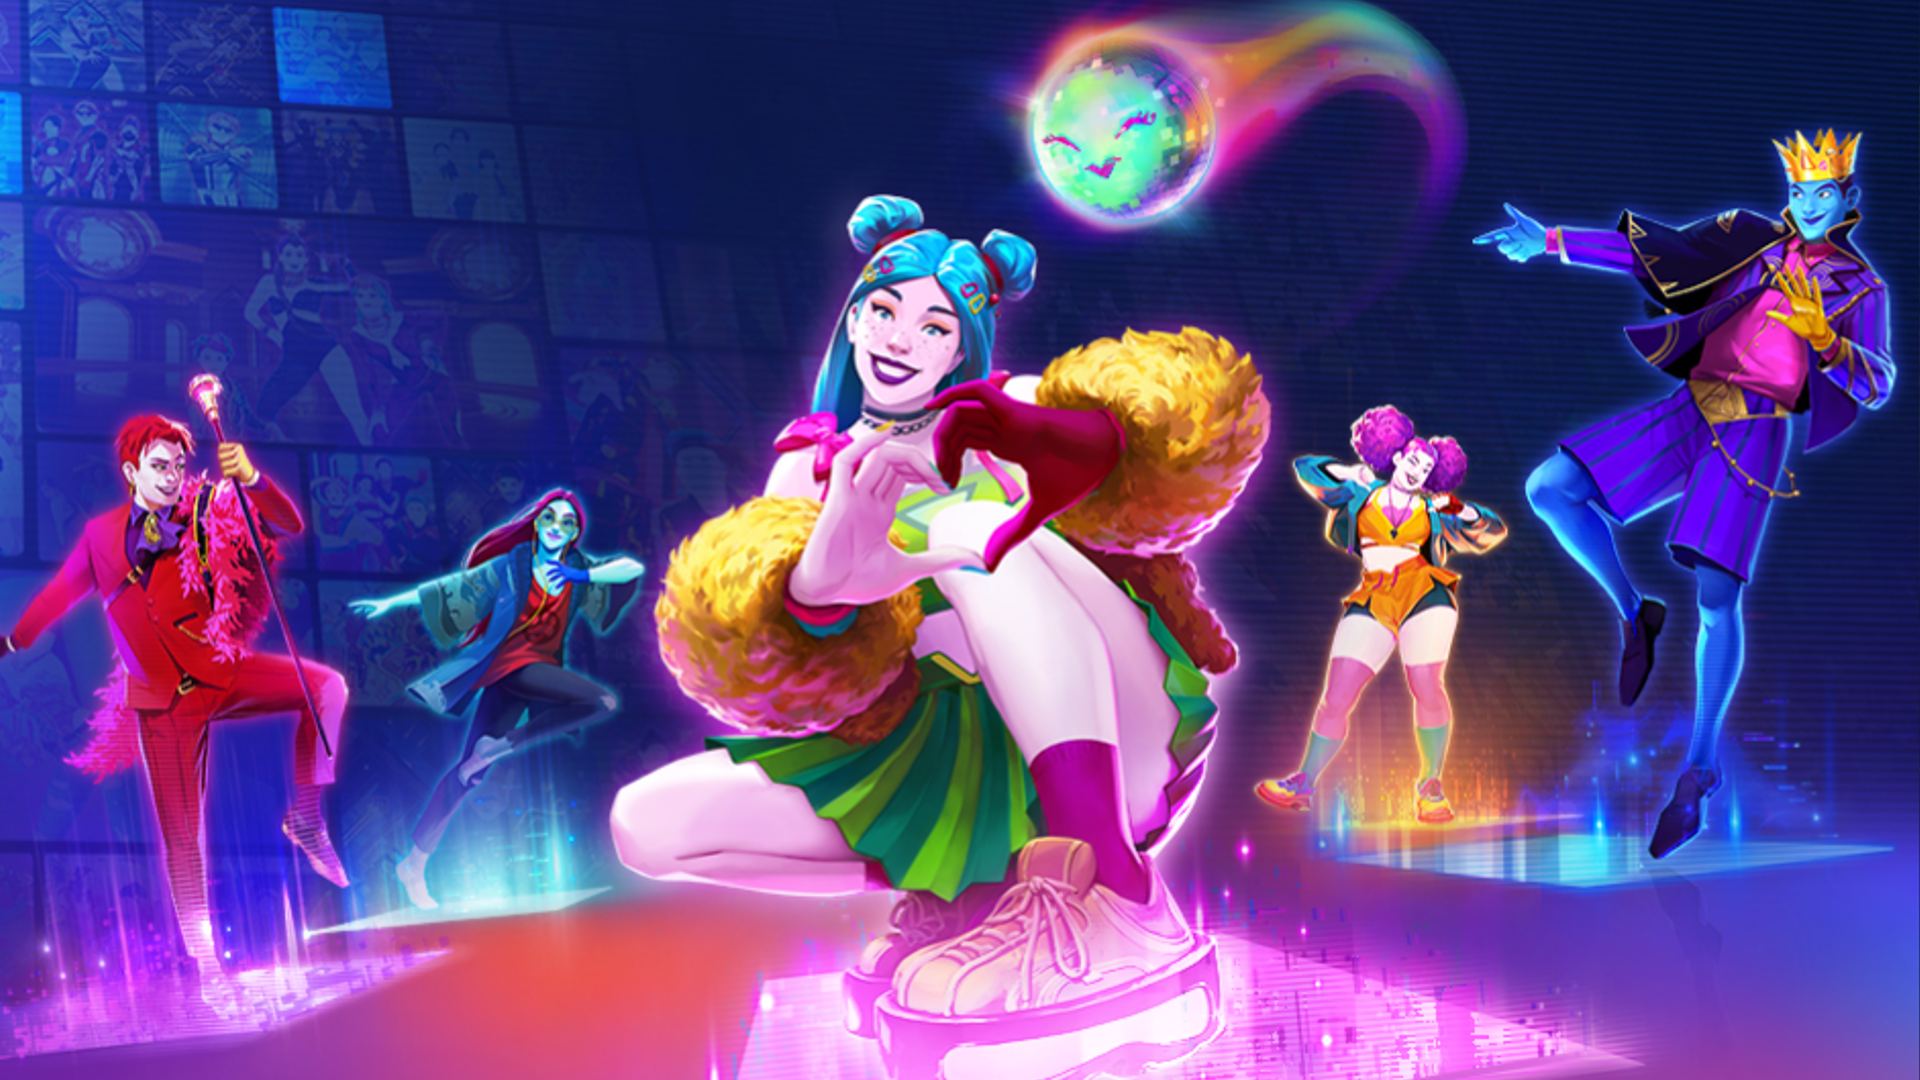 Just Dance: Multiple dancers can be seen in key art